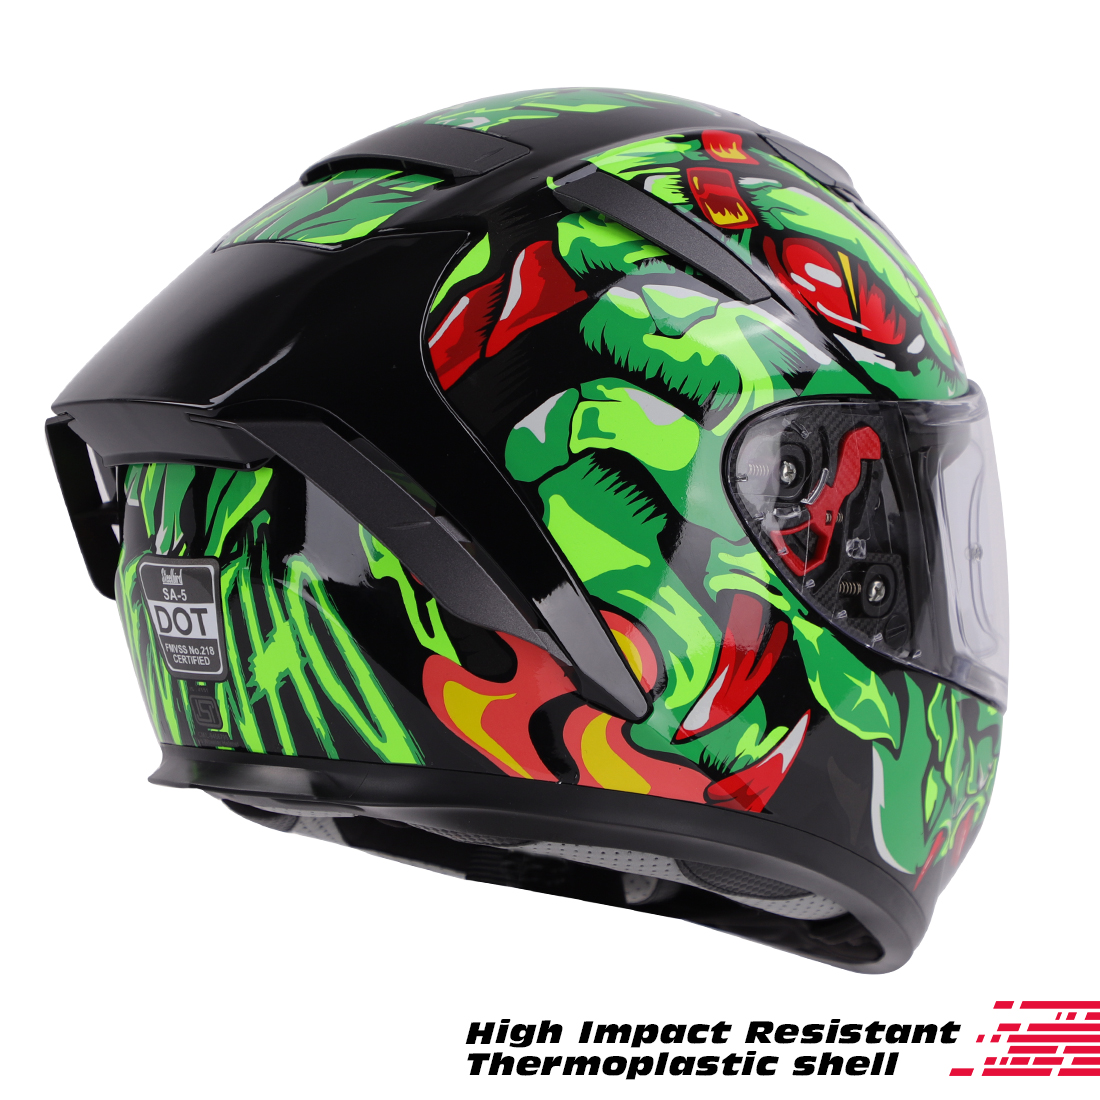 Steelbird SA-5 Monster ISI/DOT Certified Full Face Graphic Helmet With Outer Anti-Fog Clear Visor (Glossy Black Green)